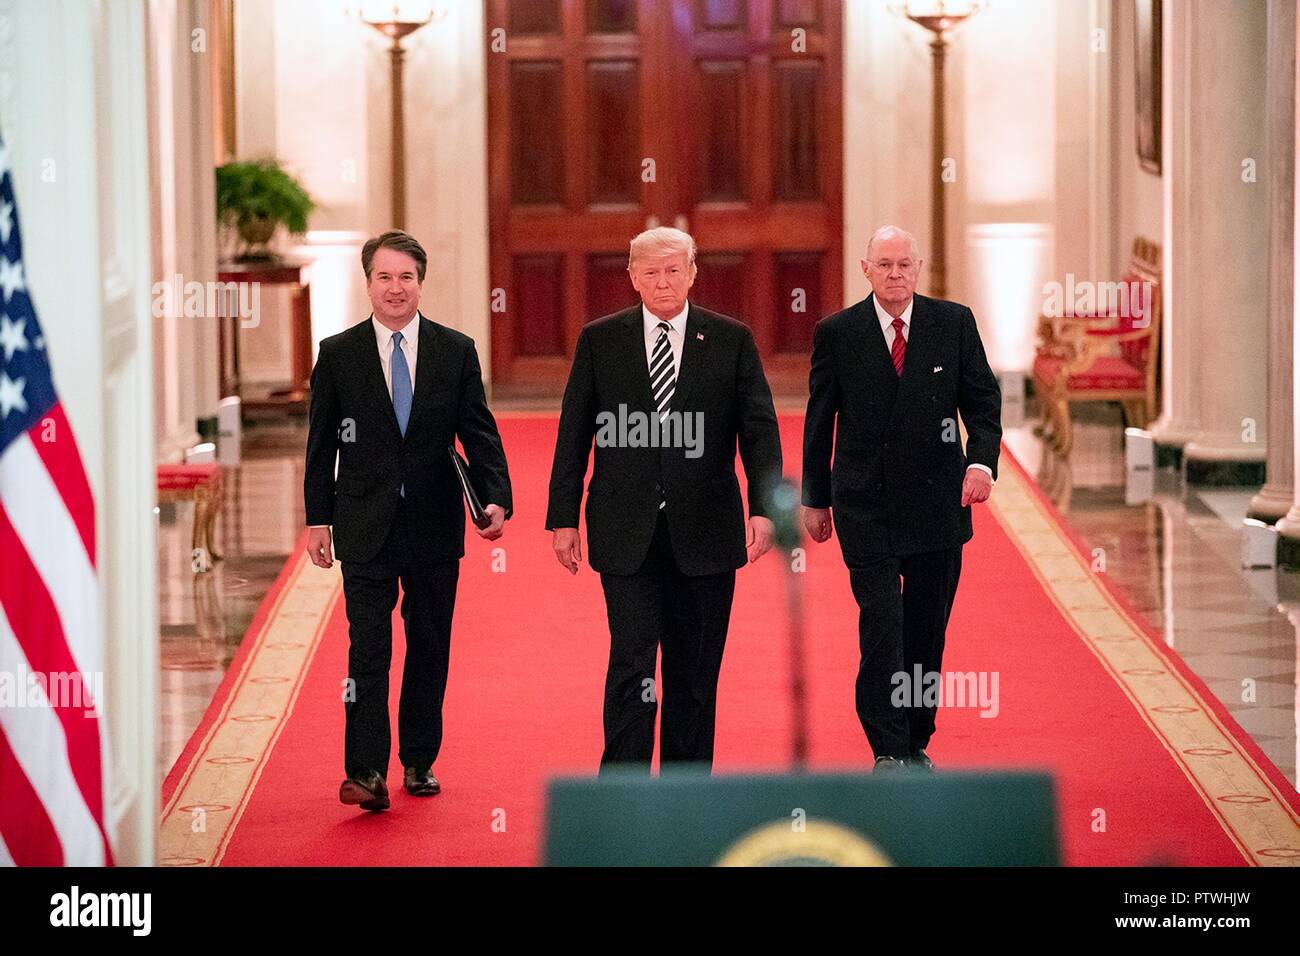 U.S President Donald Trump, center, walks with retired Supreme Court Justice Anthony Kennedy, right, and Judge Brett Kavanaugh, prior to a symbolic public swearing-in at the White House October 8, 2018 Washington, DC. Stock Photo